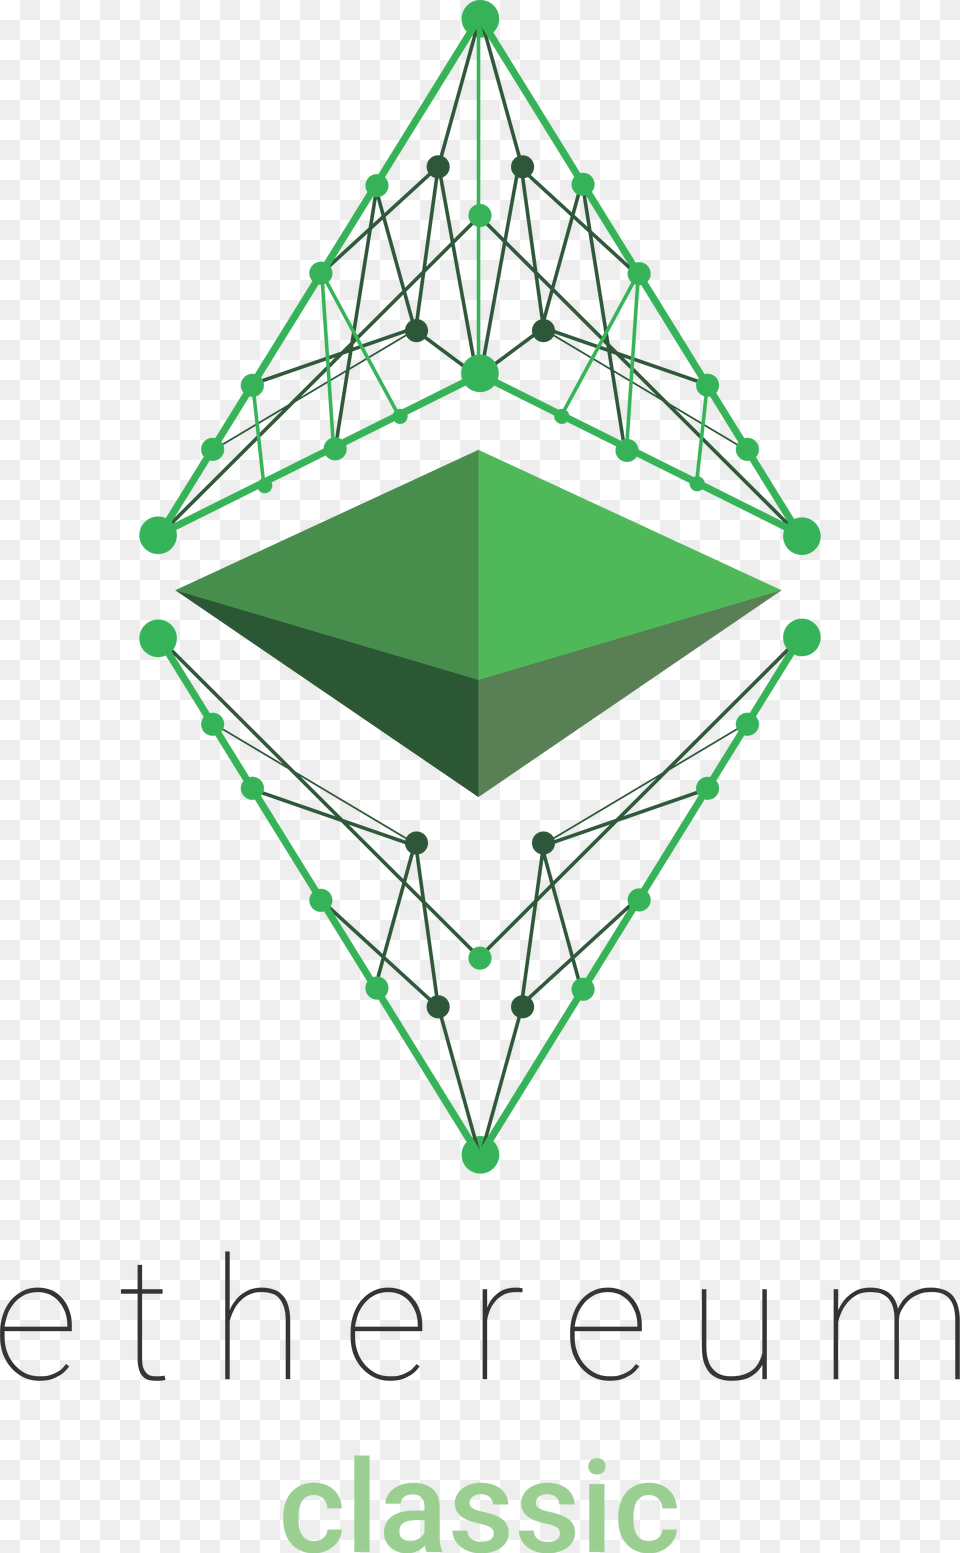 Ethereum Classic Logo, Accessories, Jewelry, Gemstone, Triangle Png Image